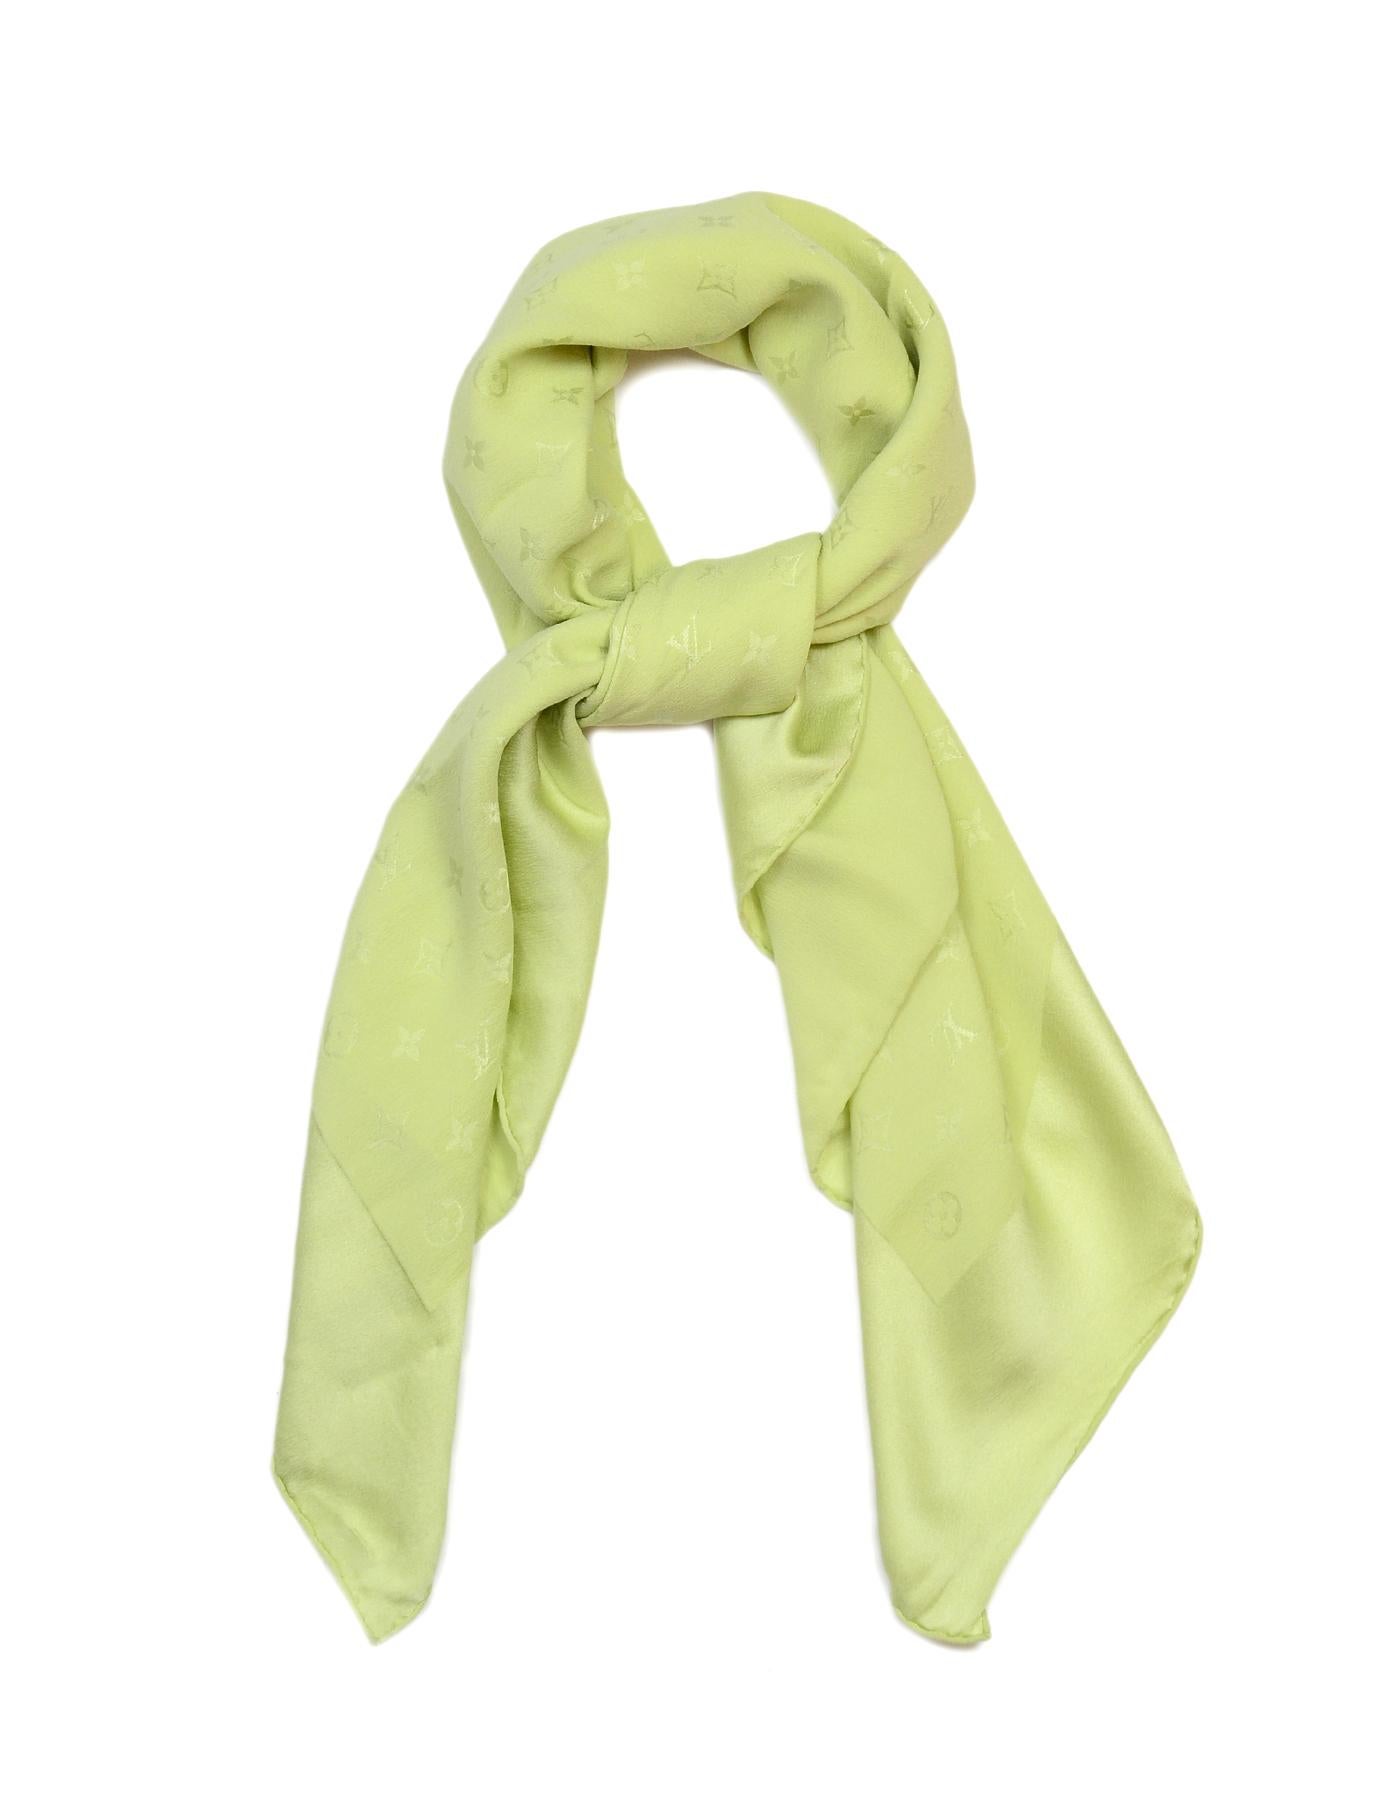 Louis Vuitton Light Green LV Monogram Silk Scarf

Color: Light green
Materials: Silk (no composition tag)
Overall Condition: Excellent pre-owned condition 

Measurements: 
30.5